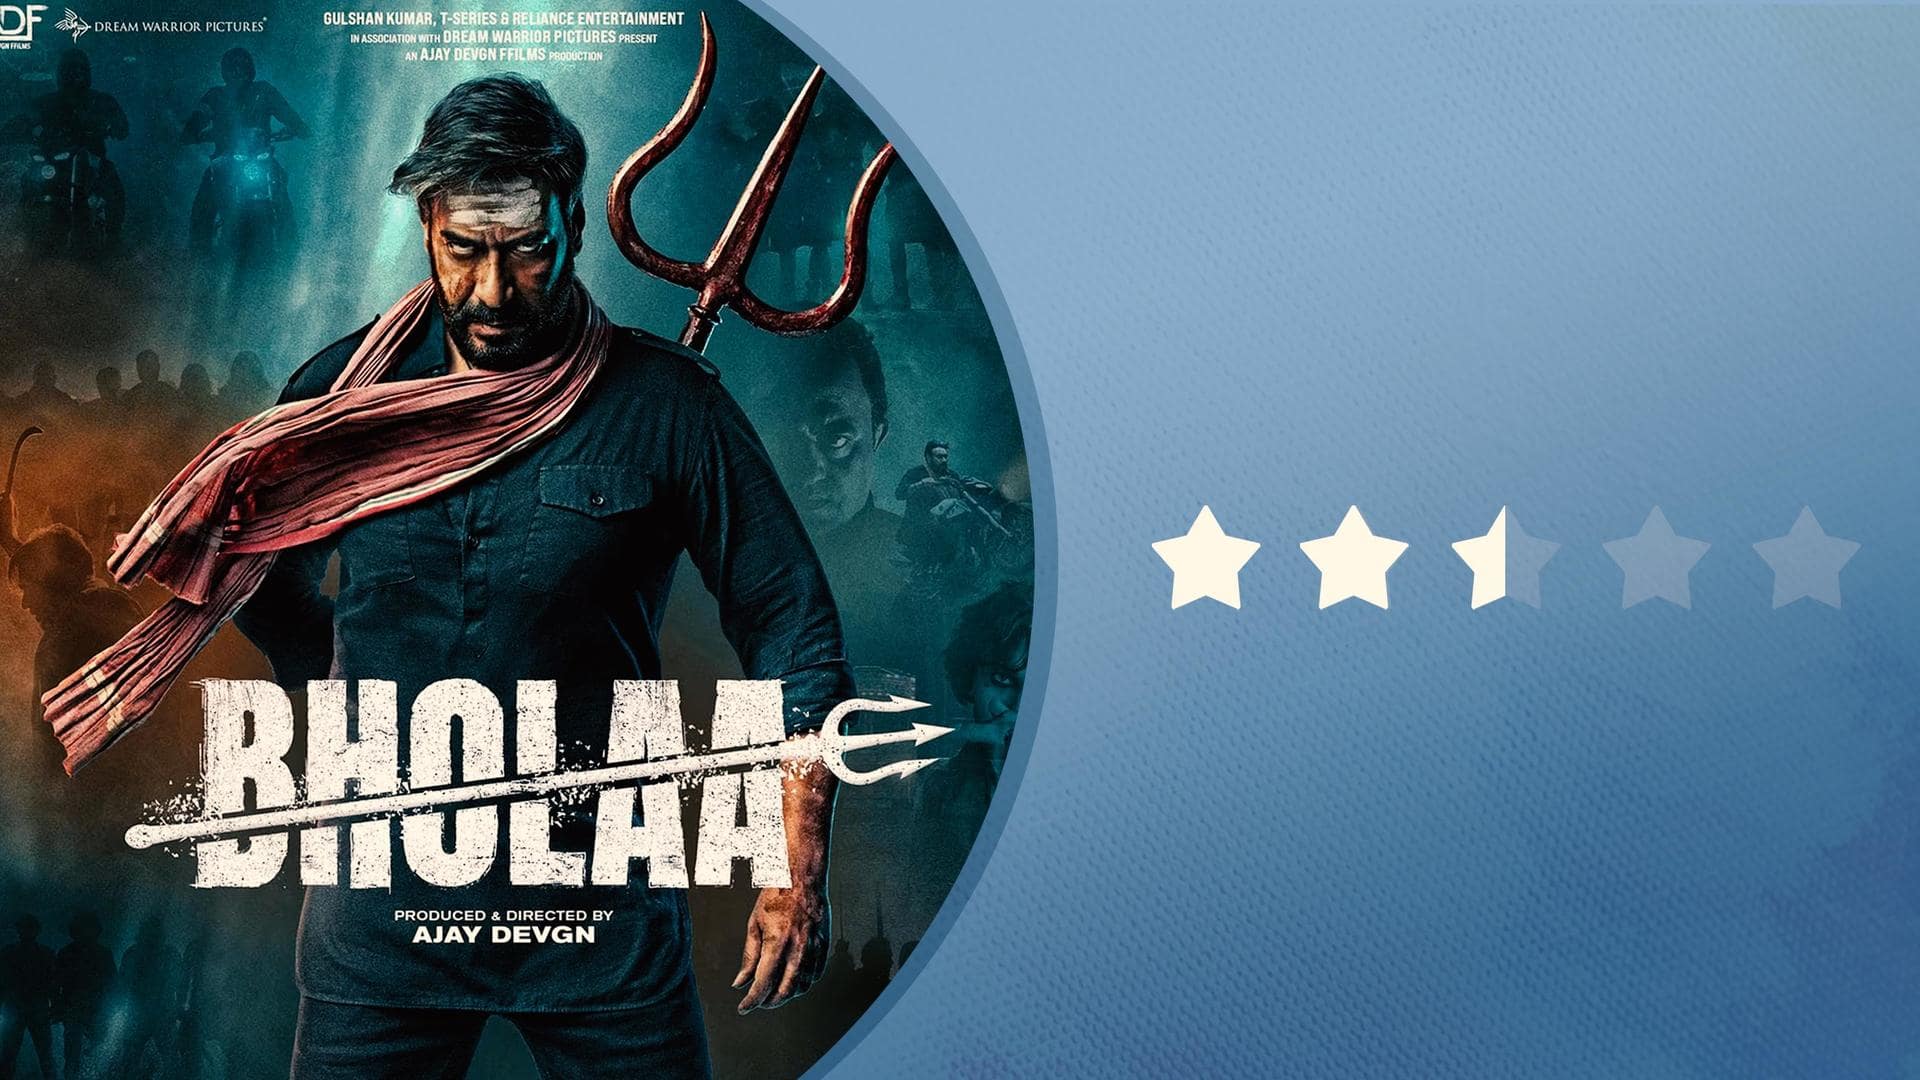 'Bholaa' review: Ajay Devgn overshadows all in this high-octane actioner